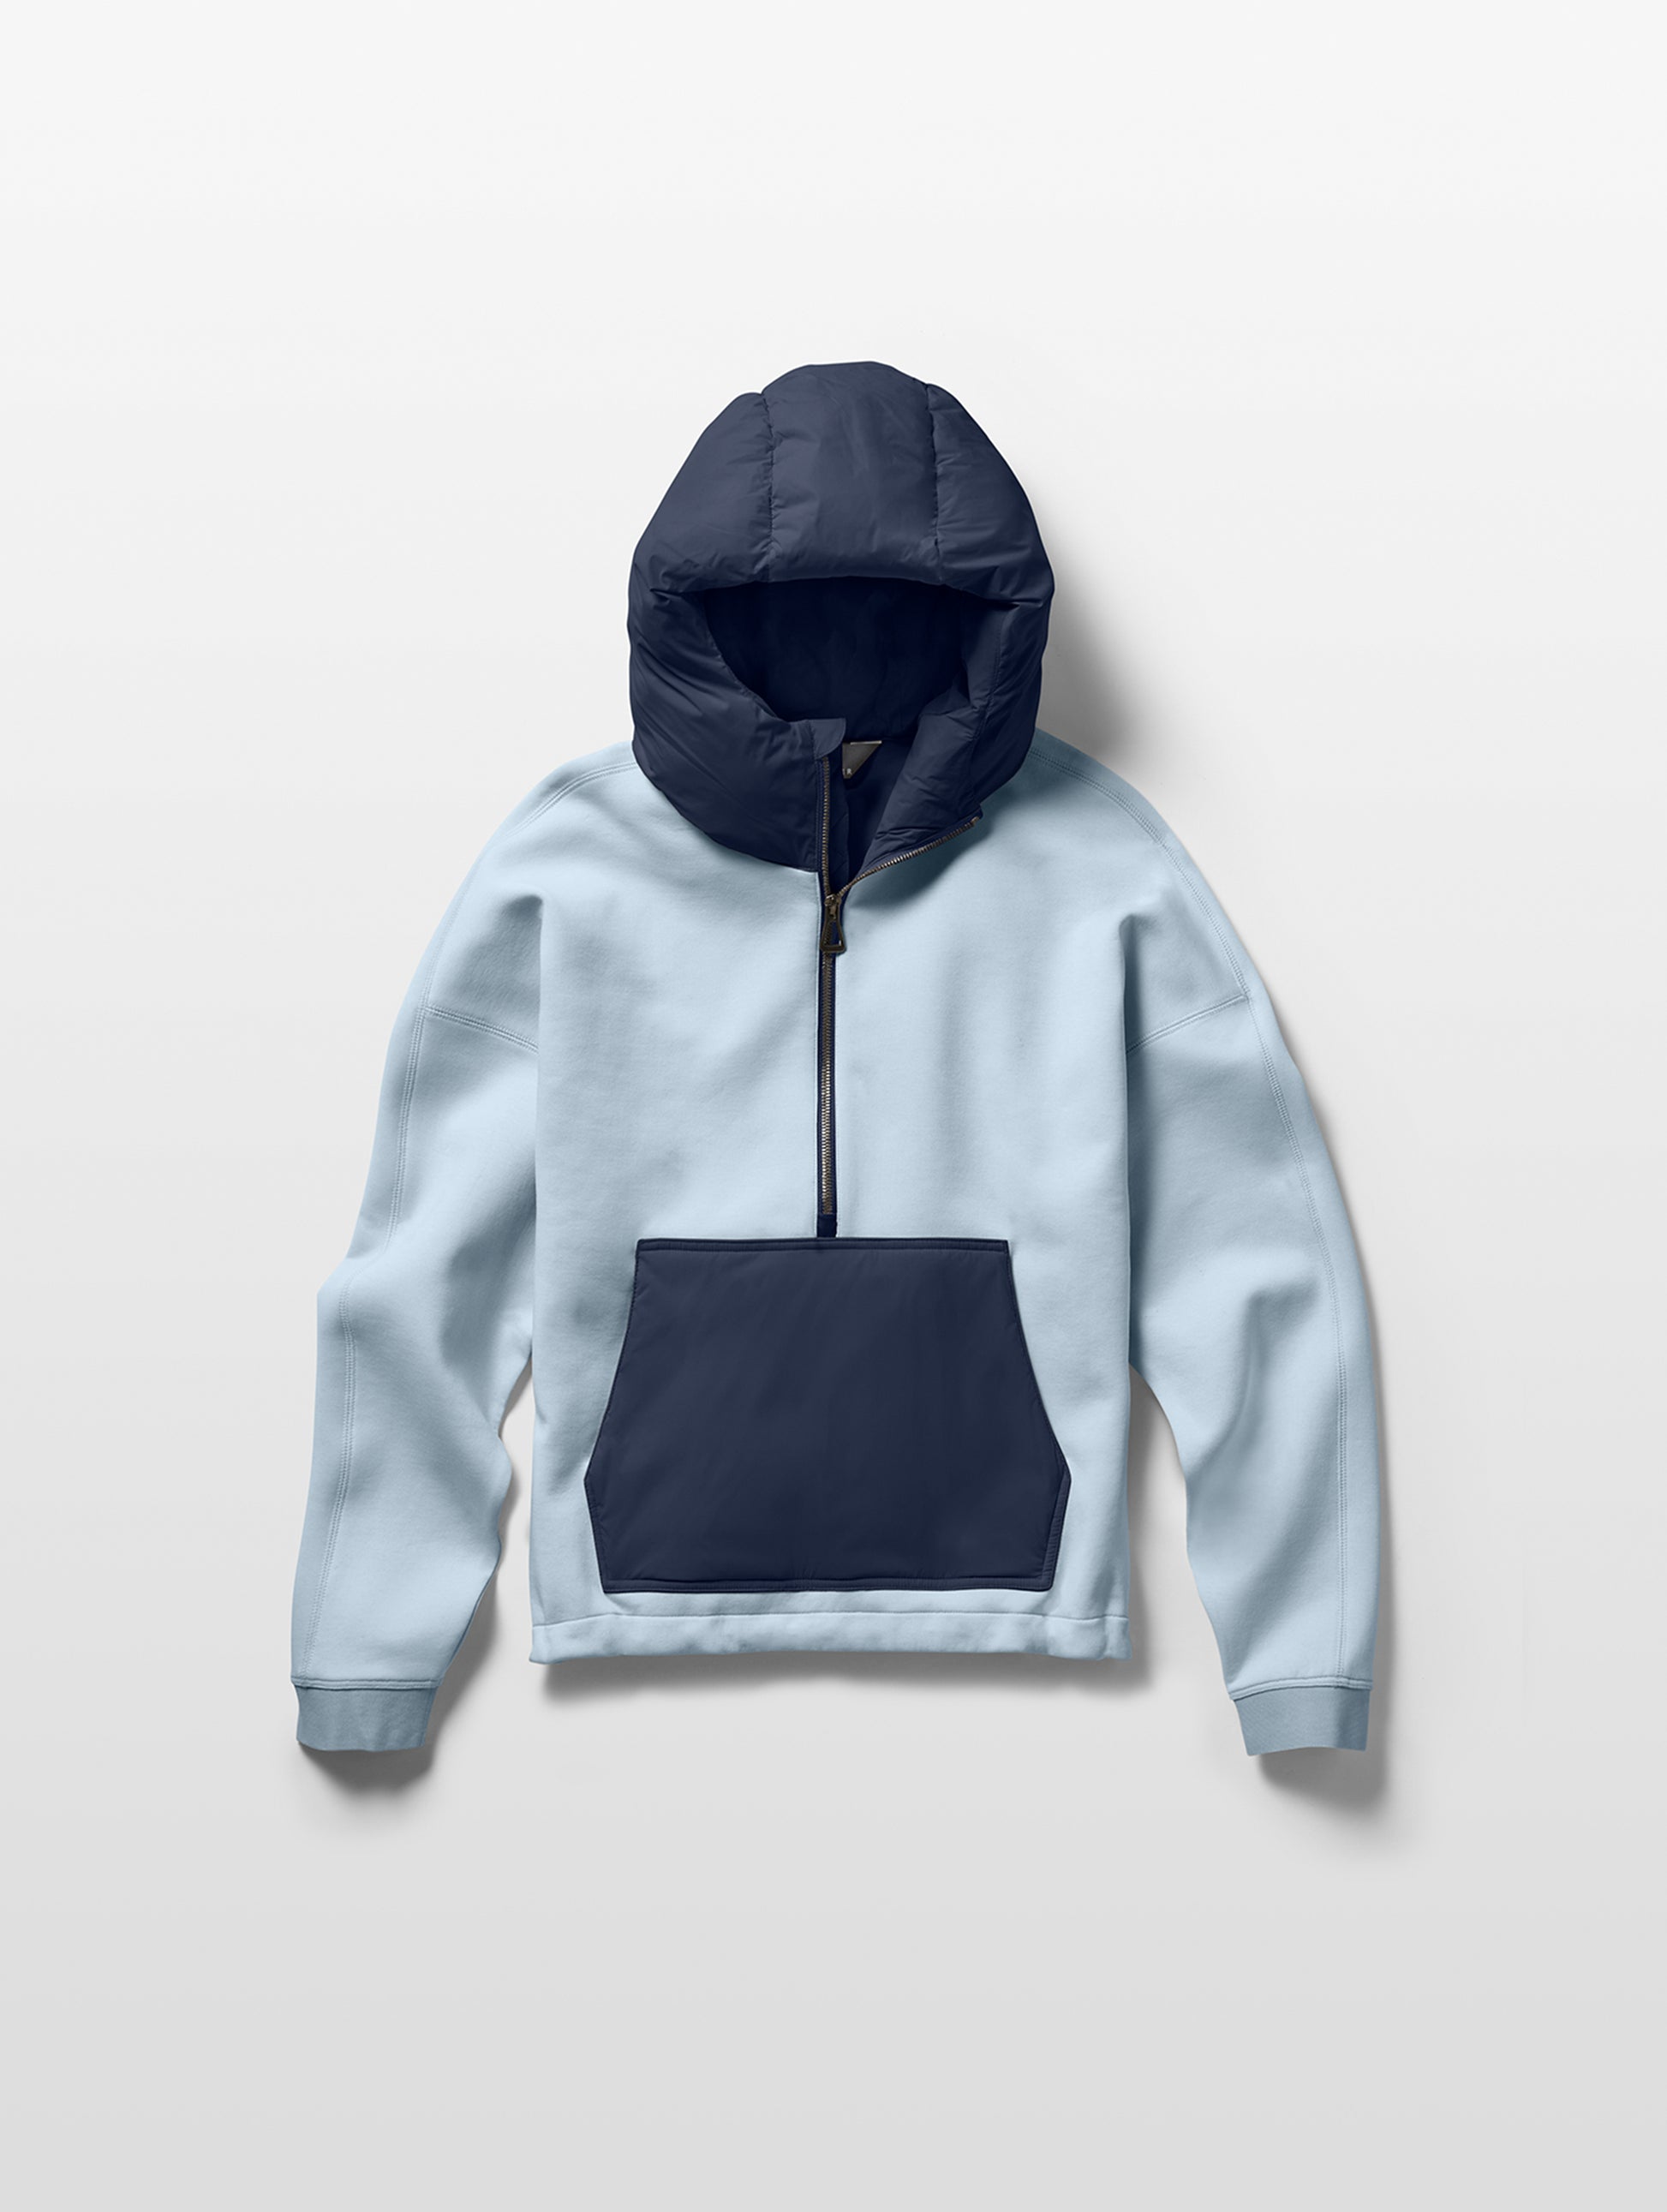 Blue Align Hooded Anorak from AETHER Apparel.